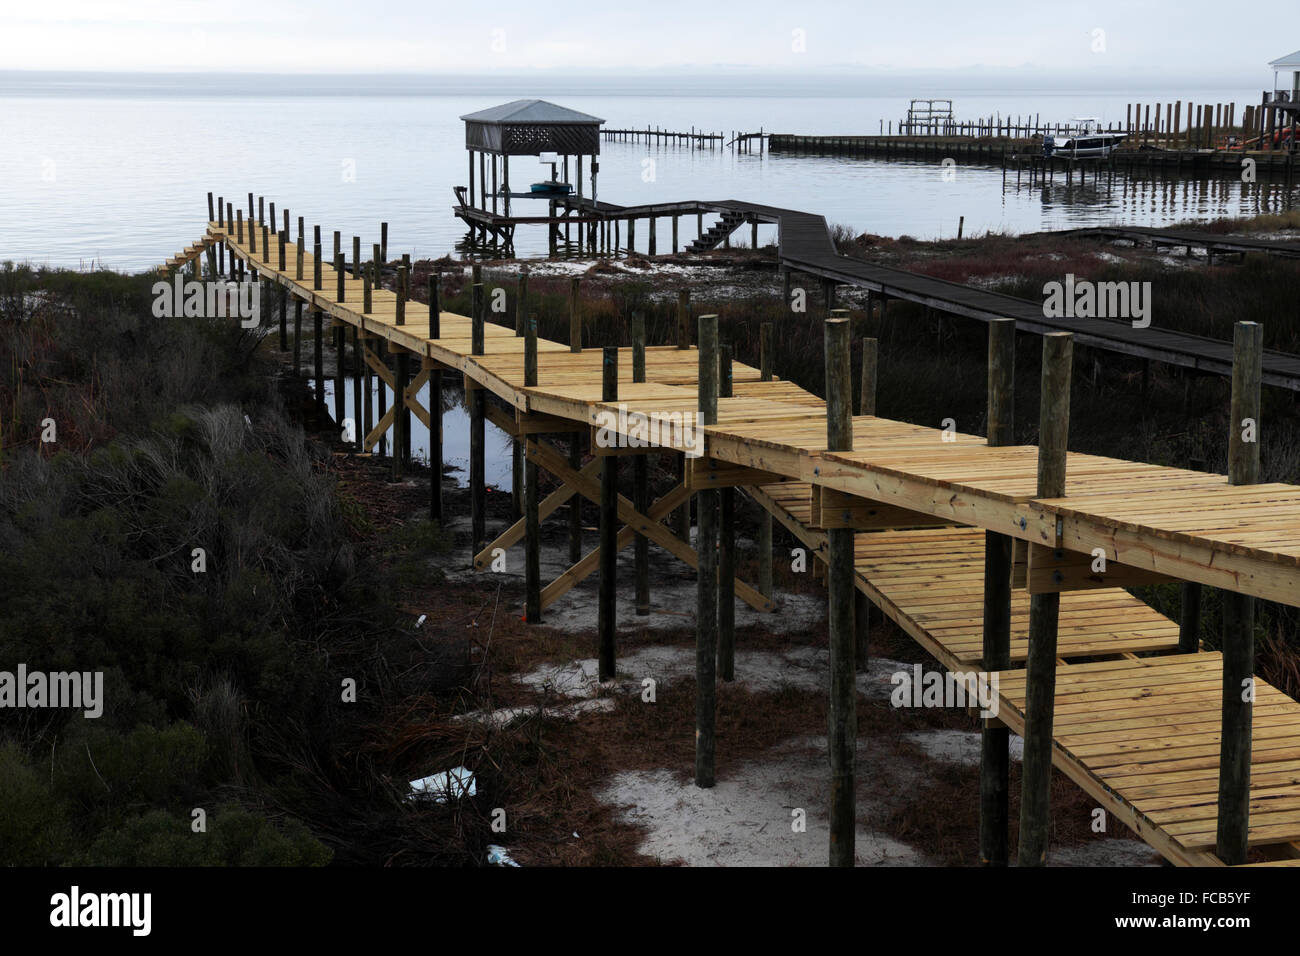 Fishing pier being built on Mobile Bay in deep south Alabama. Stock Photo